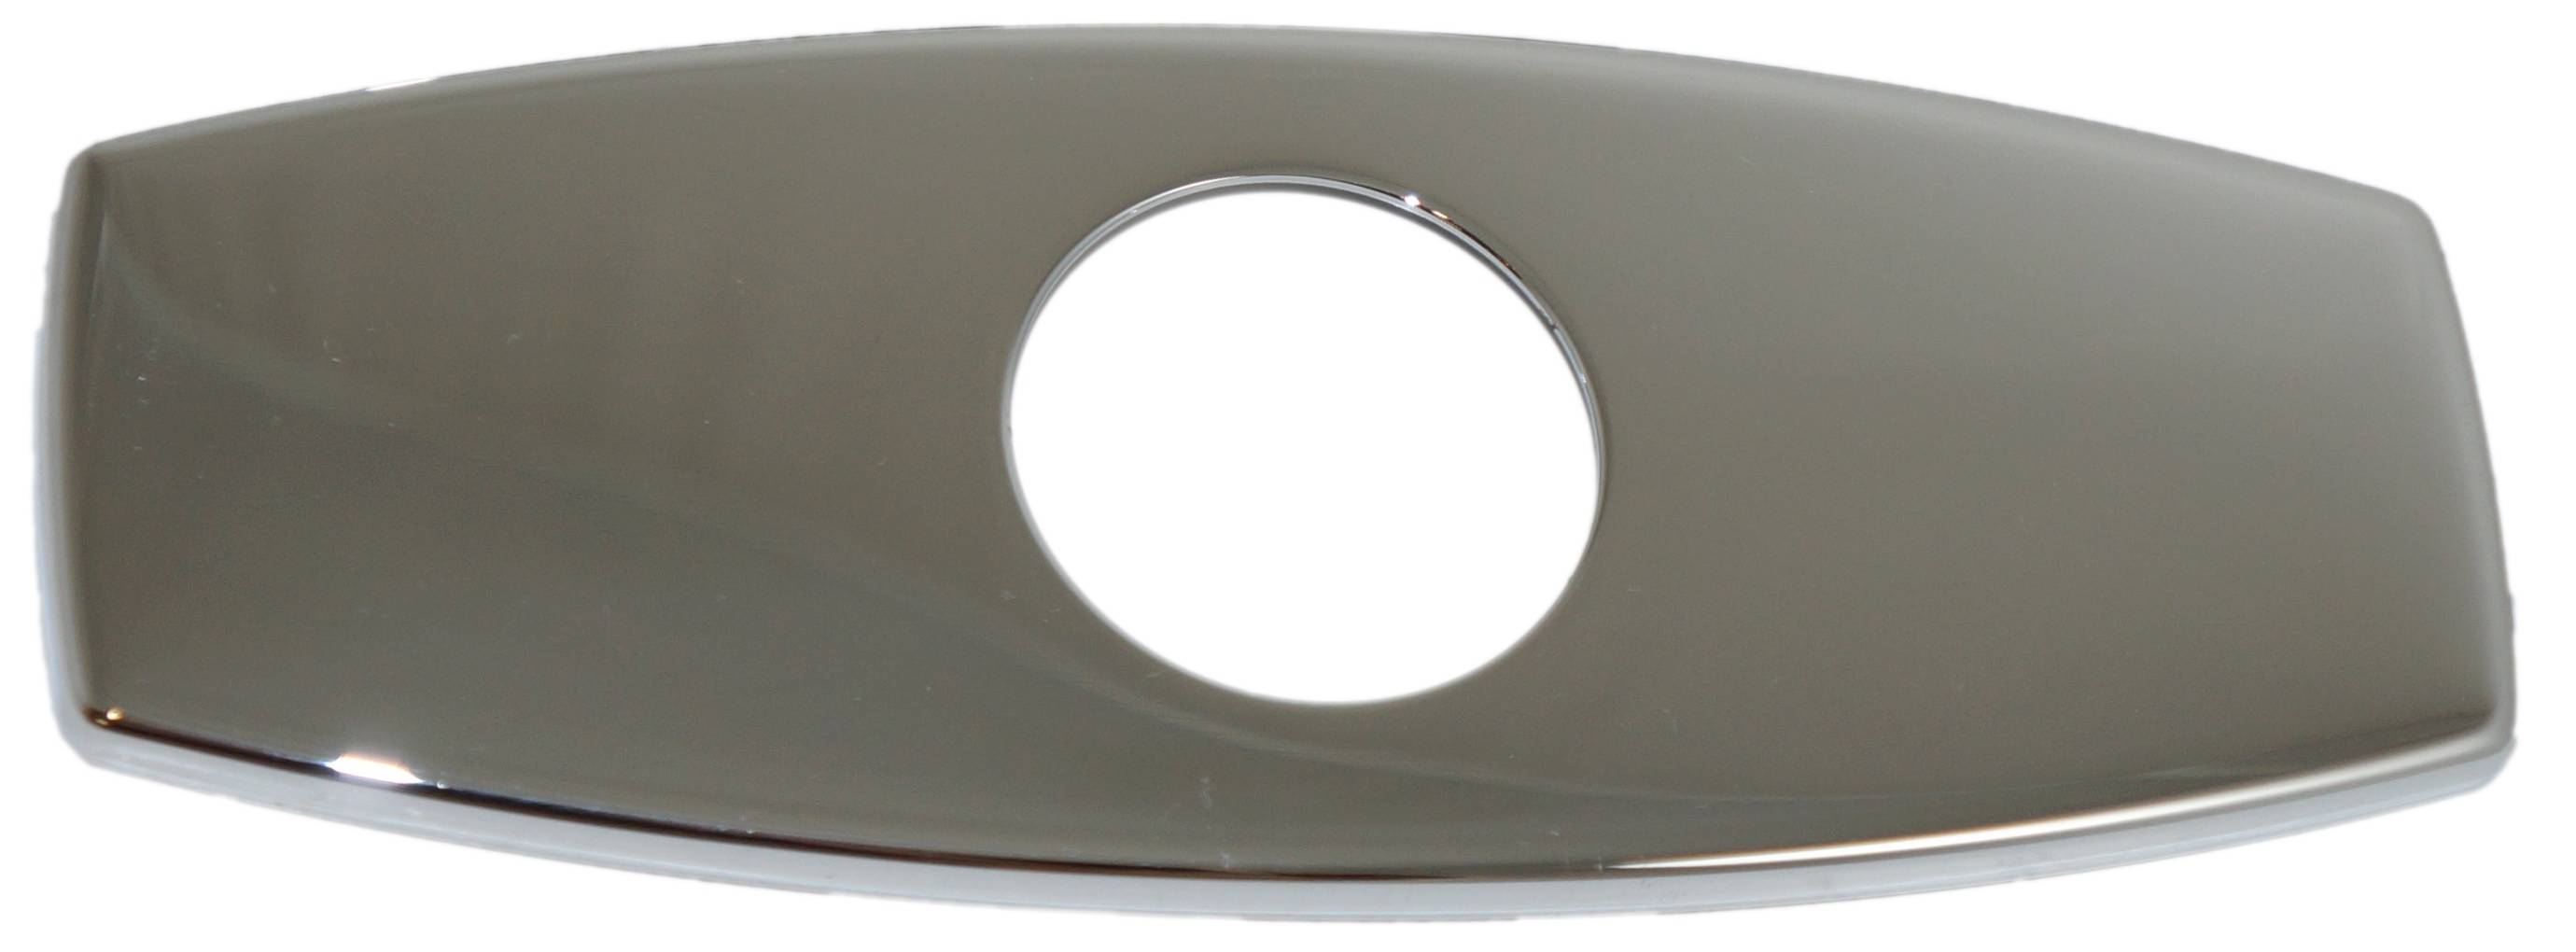 16cm chrome-plated cover plate